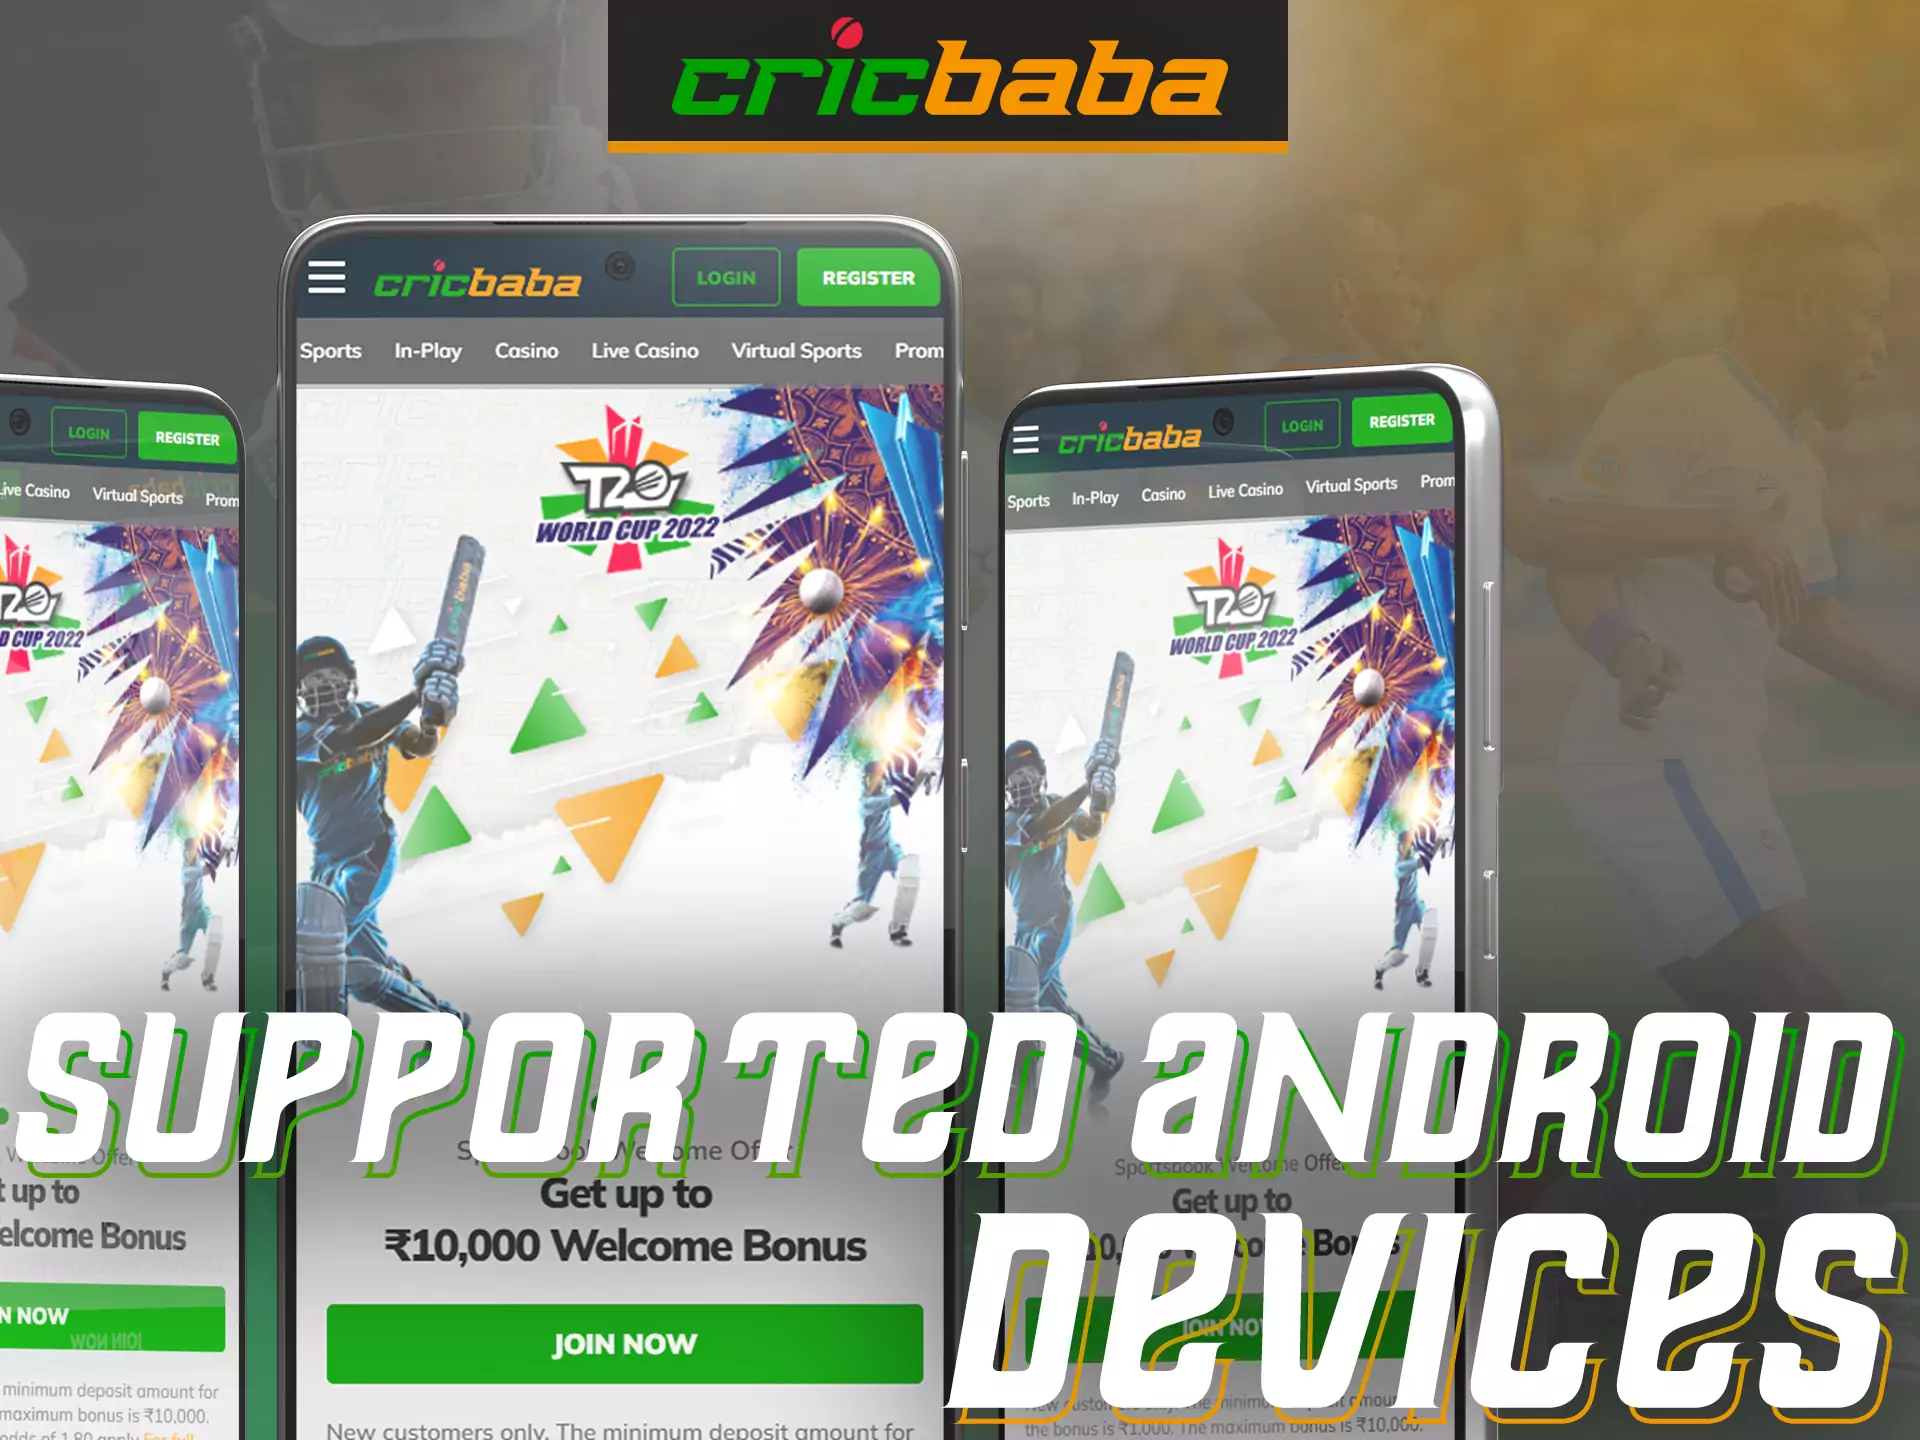 Cricbaba supports various models of Android devices.